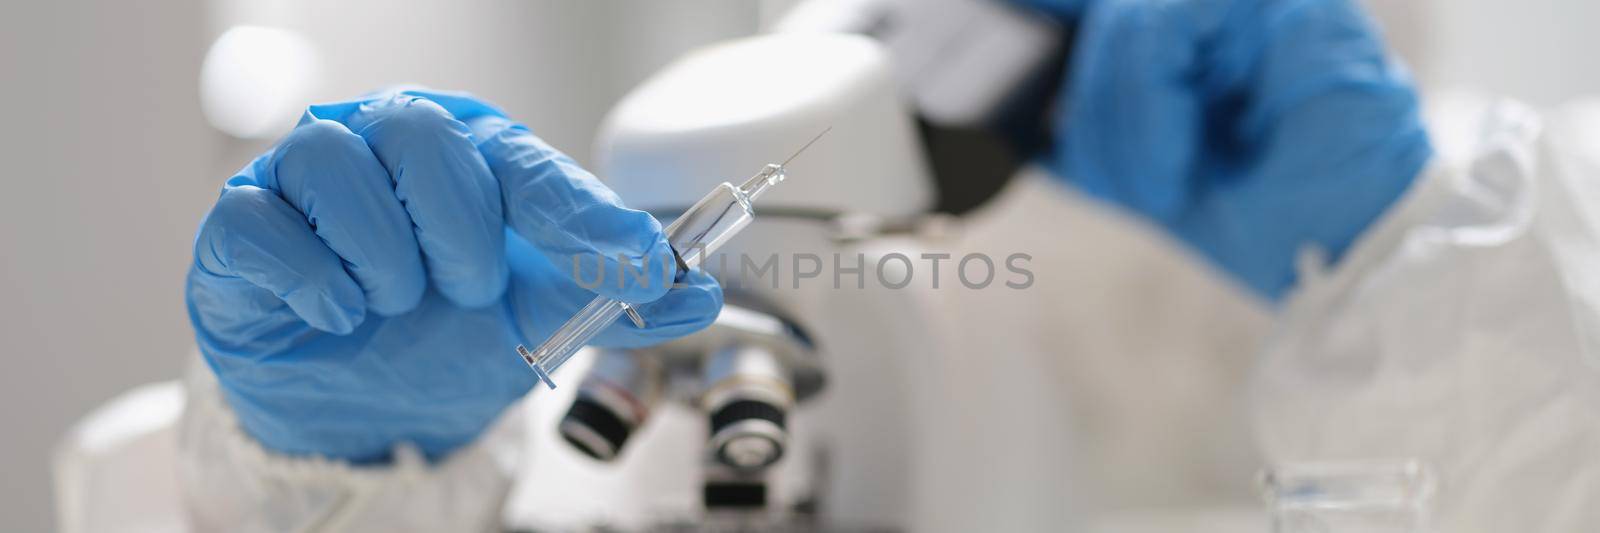 A man holds a syringe with a liquid and looks through a microscope, close-up, blurry. Virus drug research laboratory